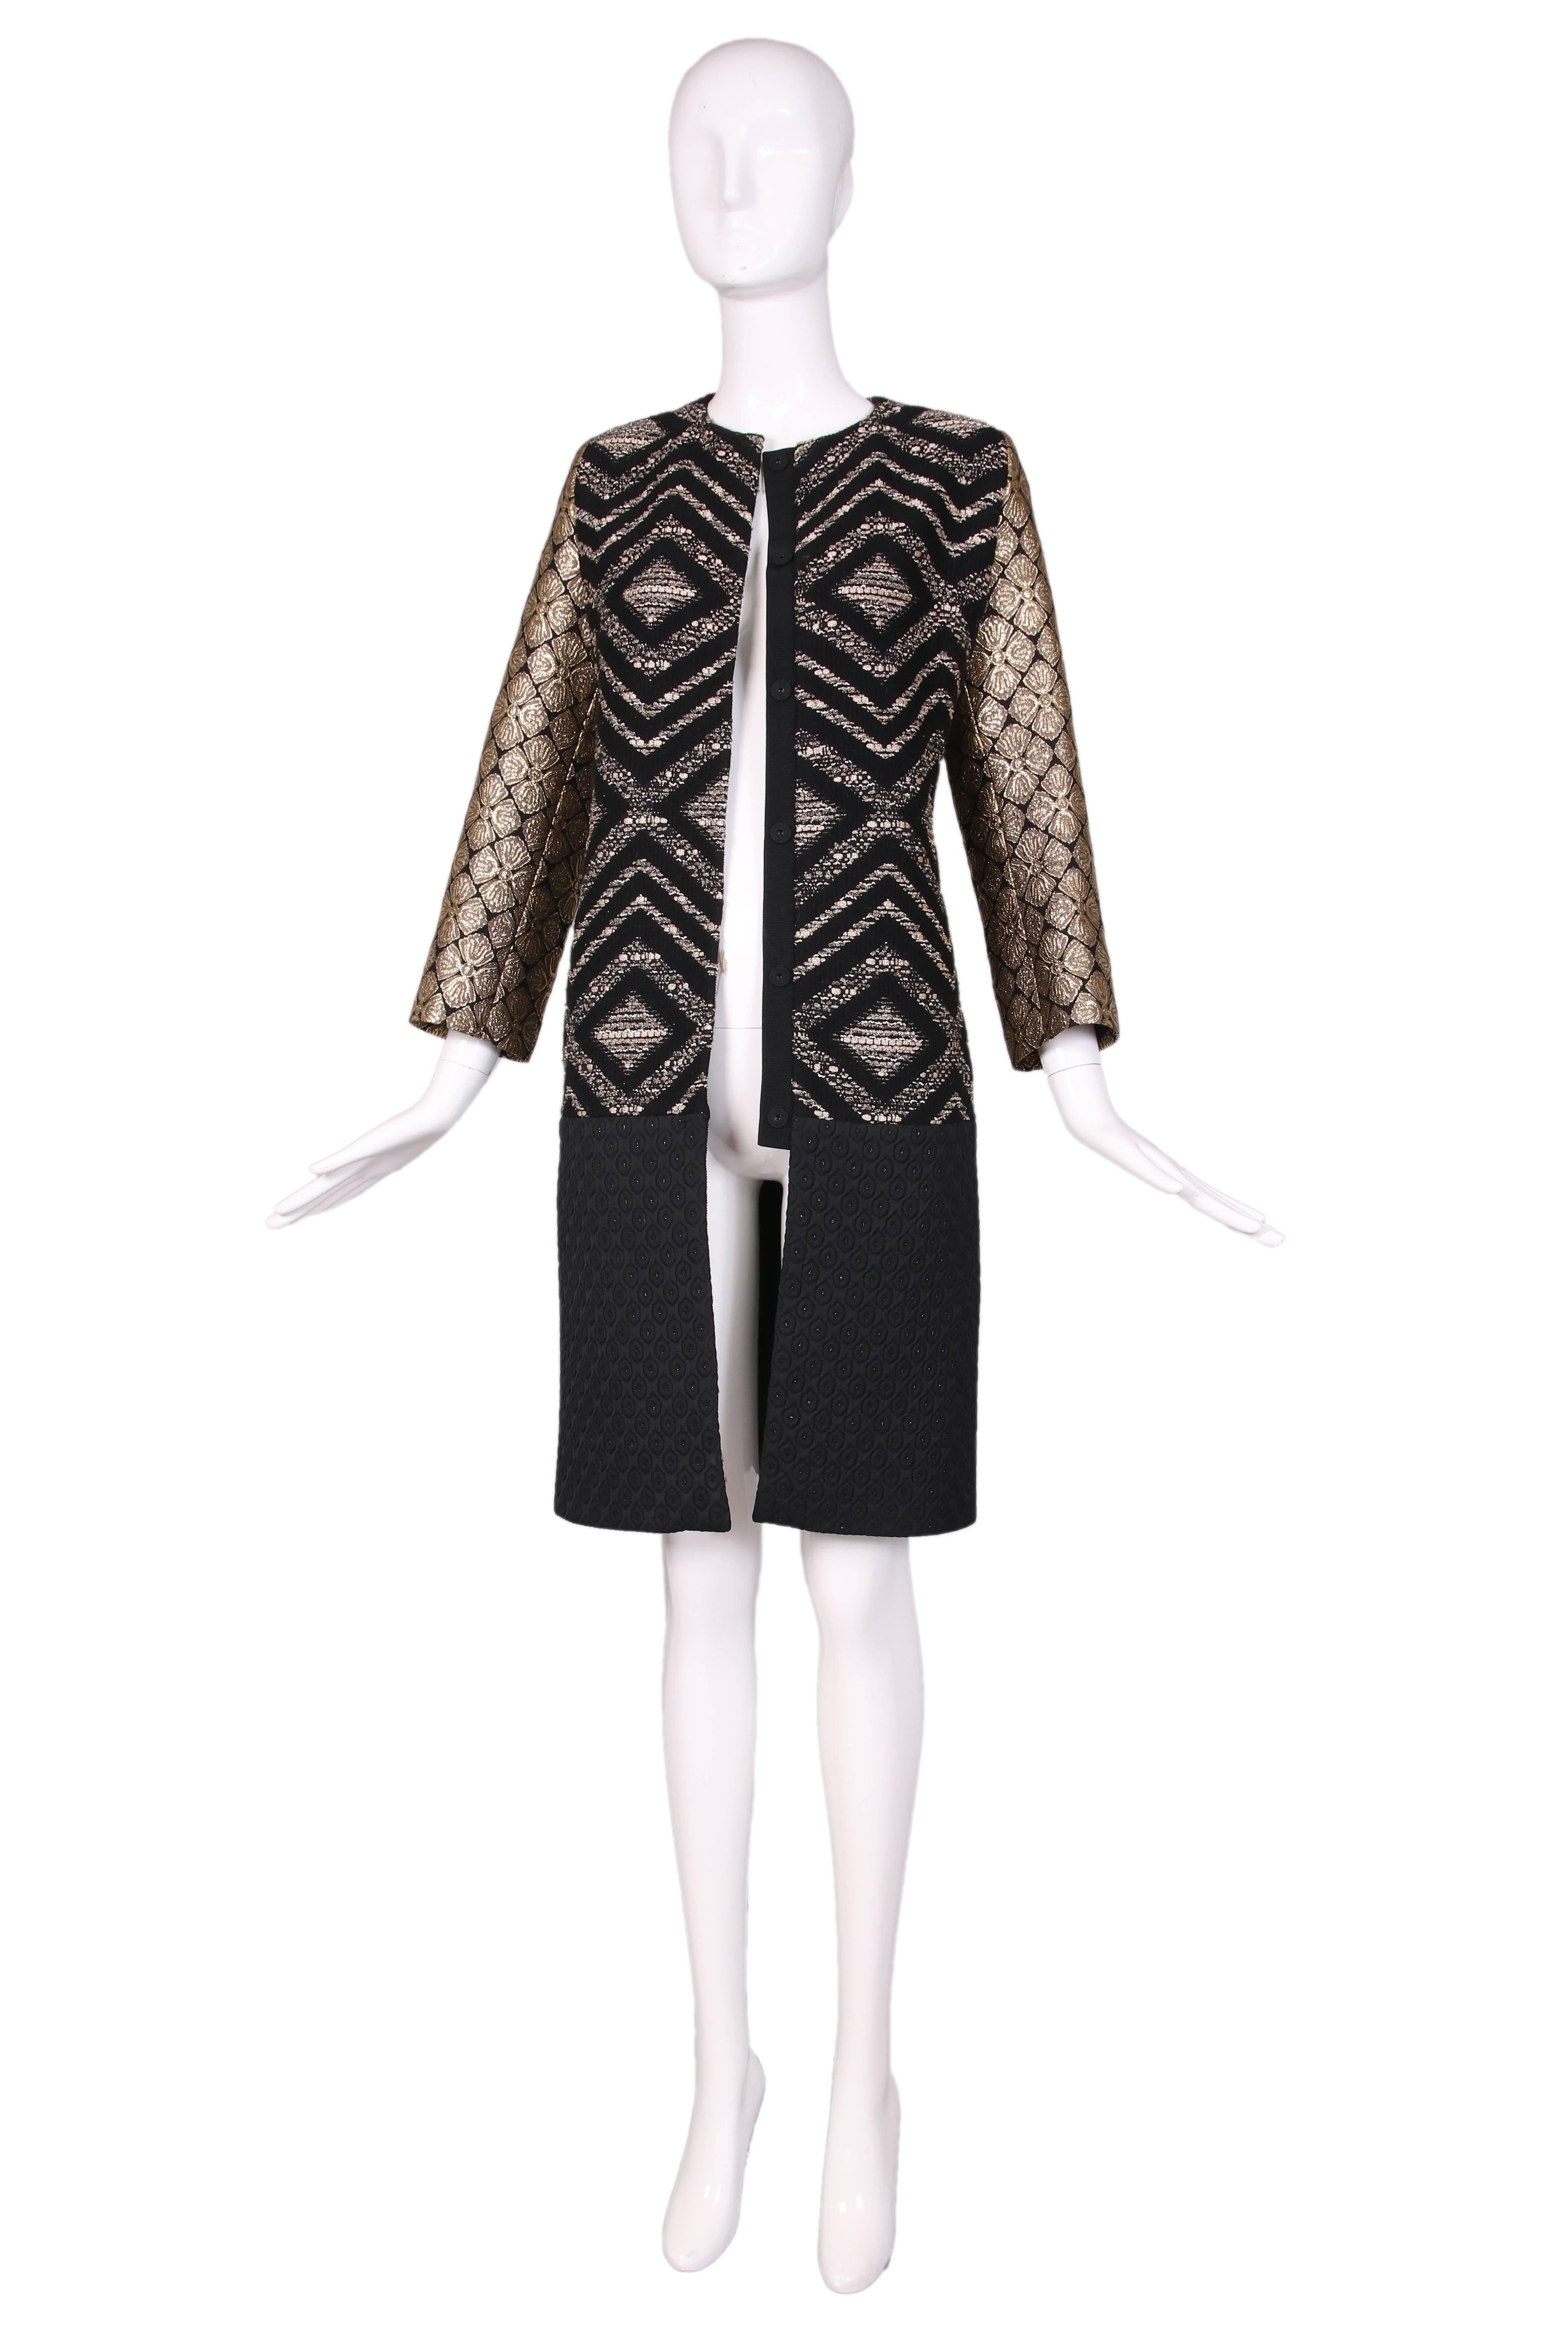 Giambattista Valli black & gold diamond pattern brocade and wool coat w/bottom half in black diamond pattern quilted fabric. Snap closure up center front. In excellent condition.
MEASUREMENTS:
Bust - 36